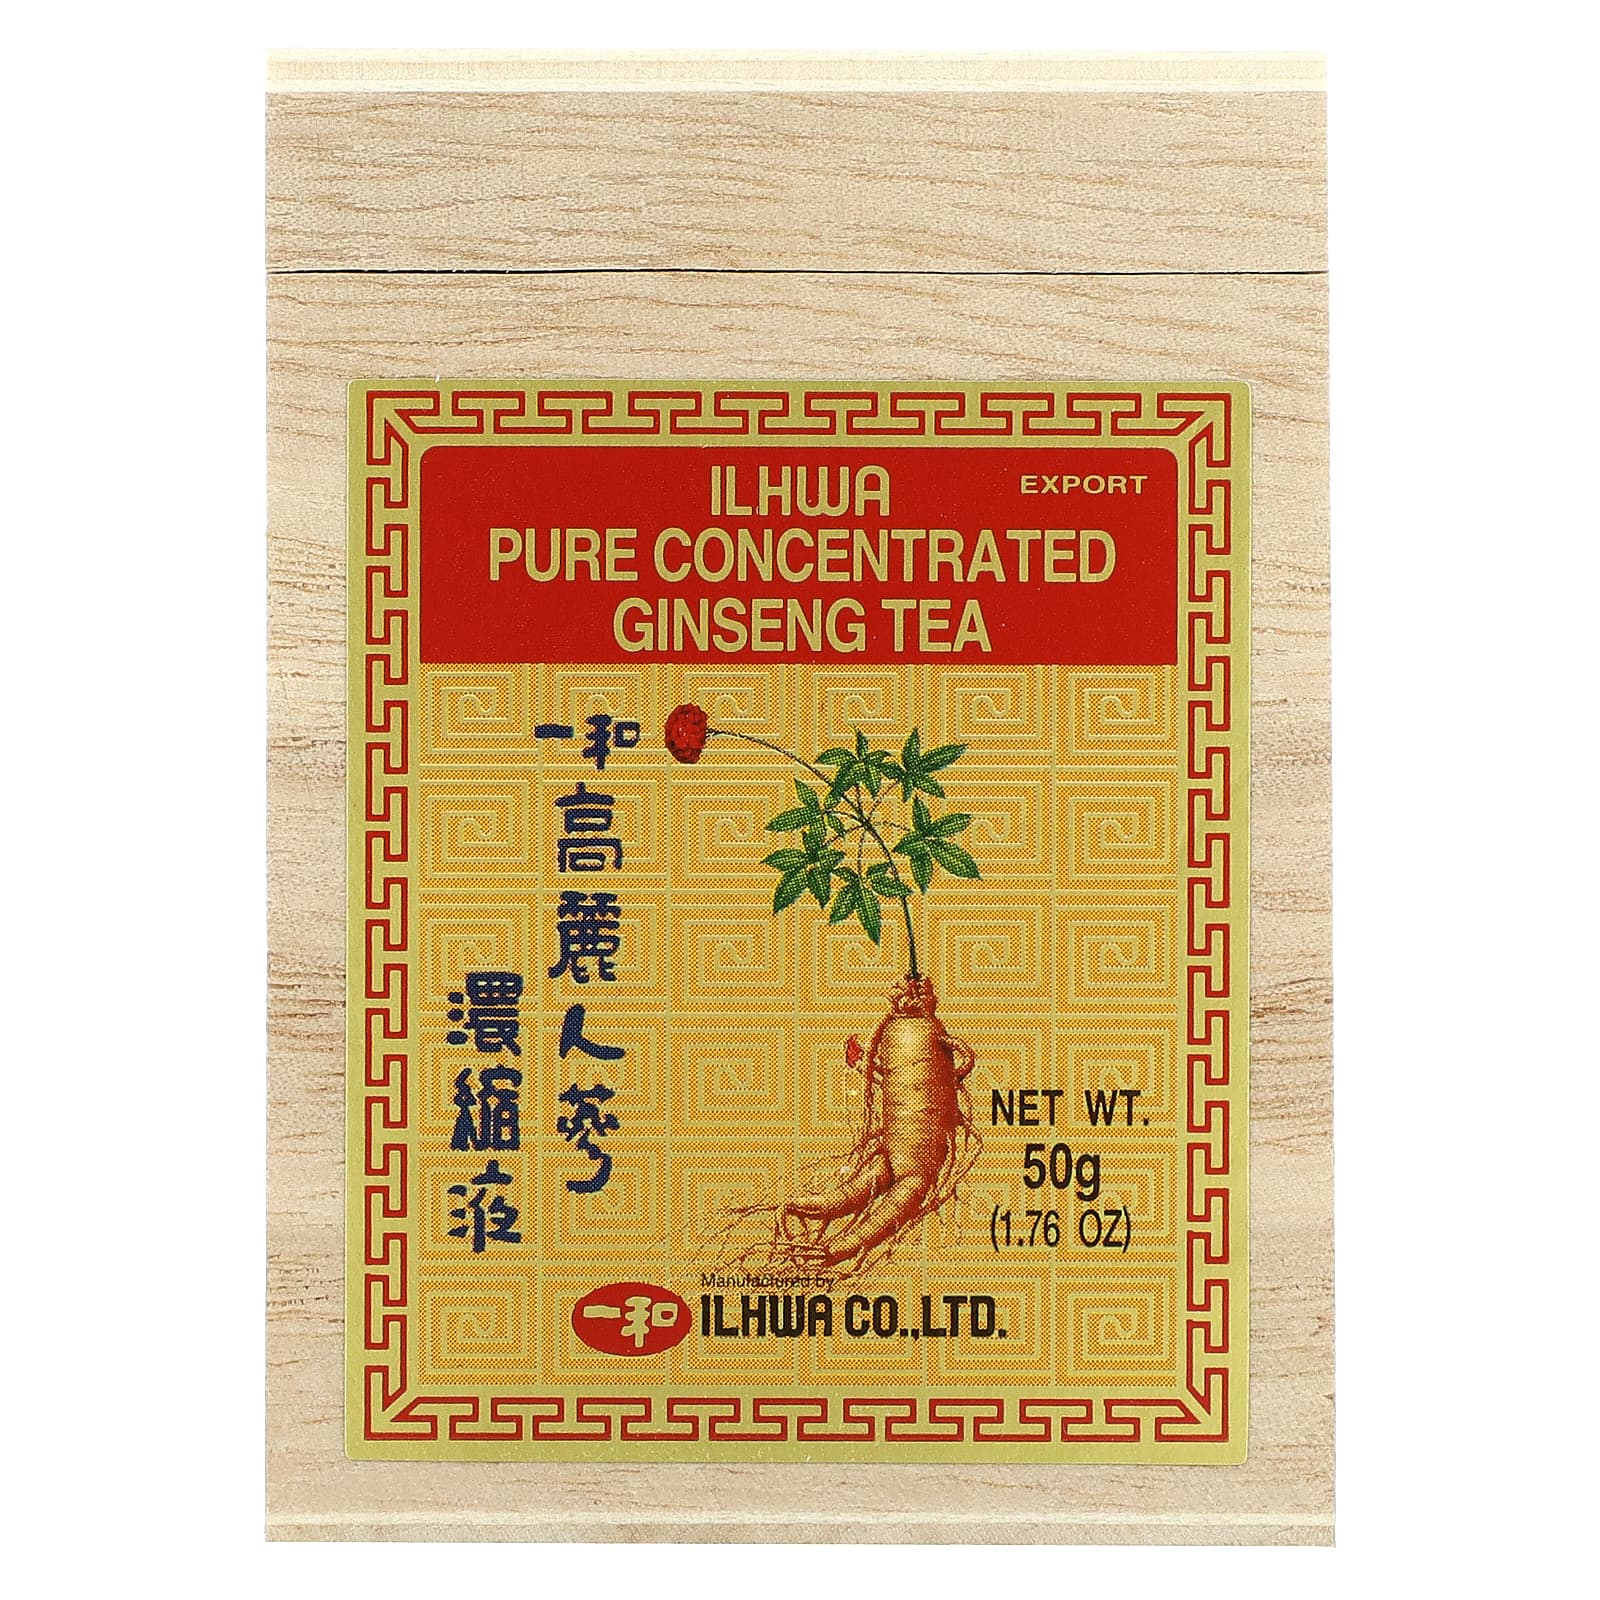 Grondig procent zeven Ilhwa, Pure Concentrated Ginseng Tea, 1.76 oz (50 g)